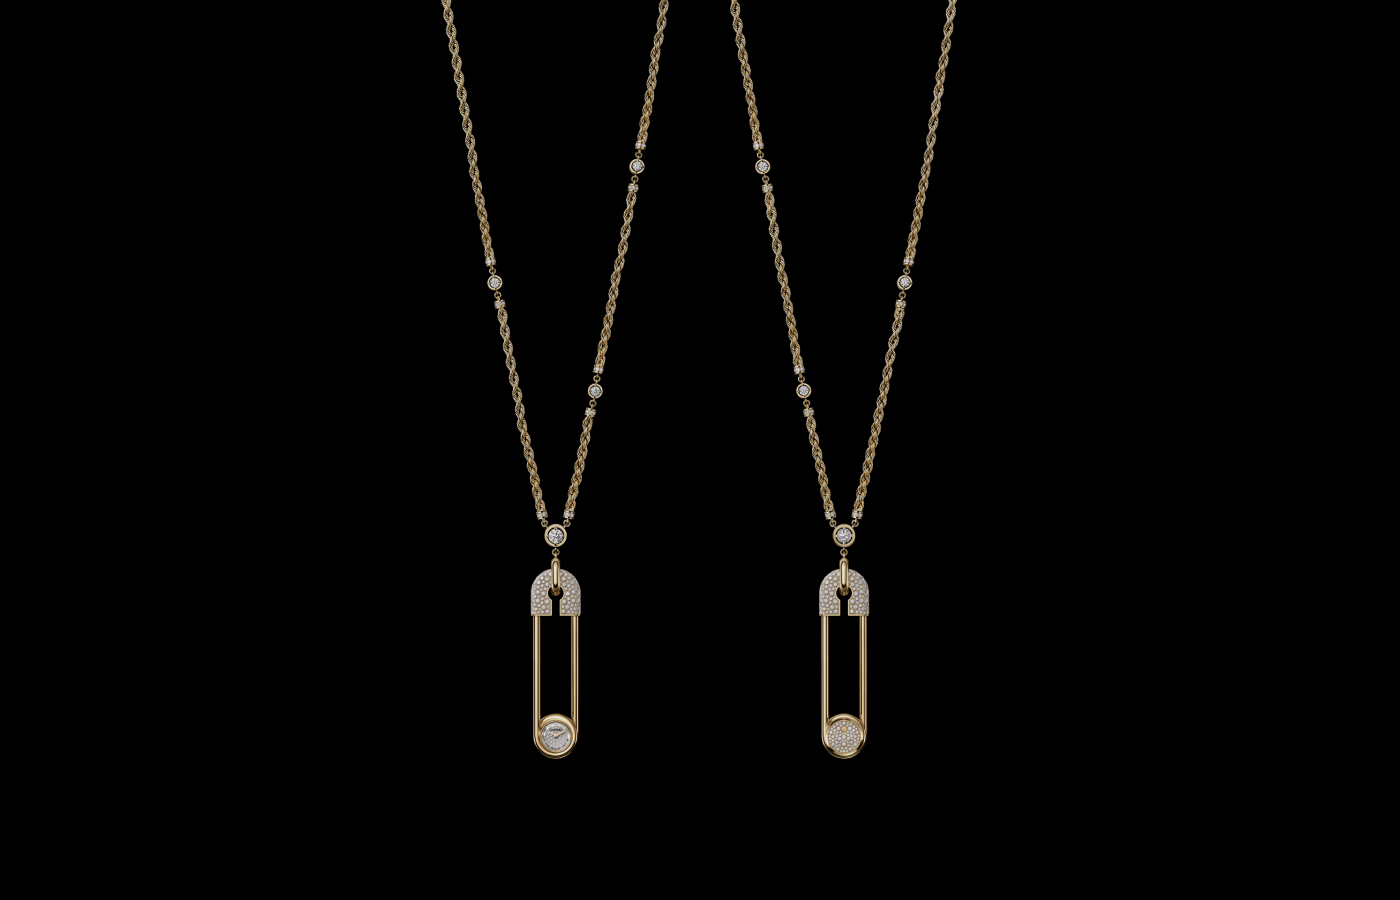 Chanel Safety Pin Long Necklace Couture watch in gold and diamond from the Couture O'Clock capsule collection